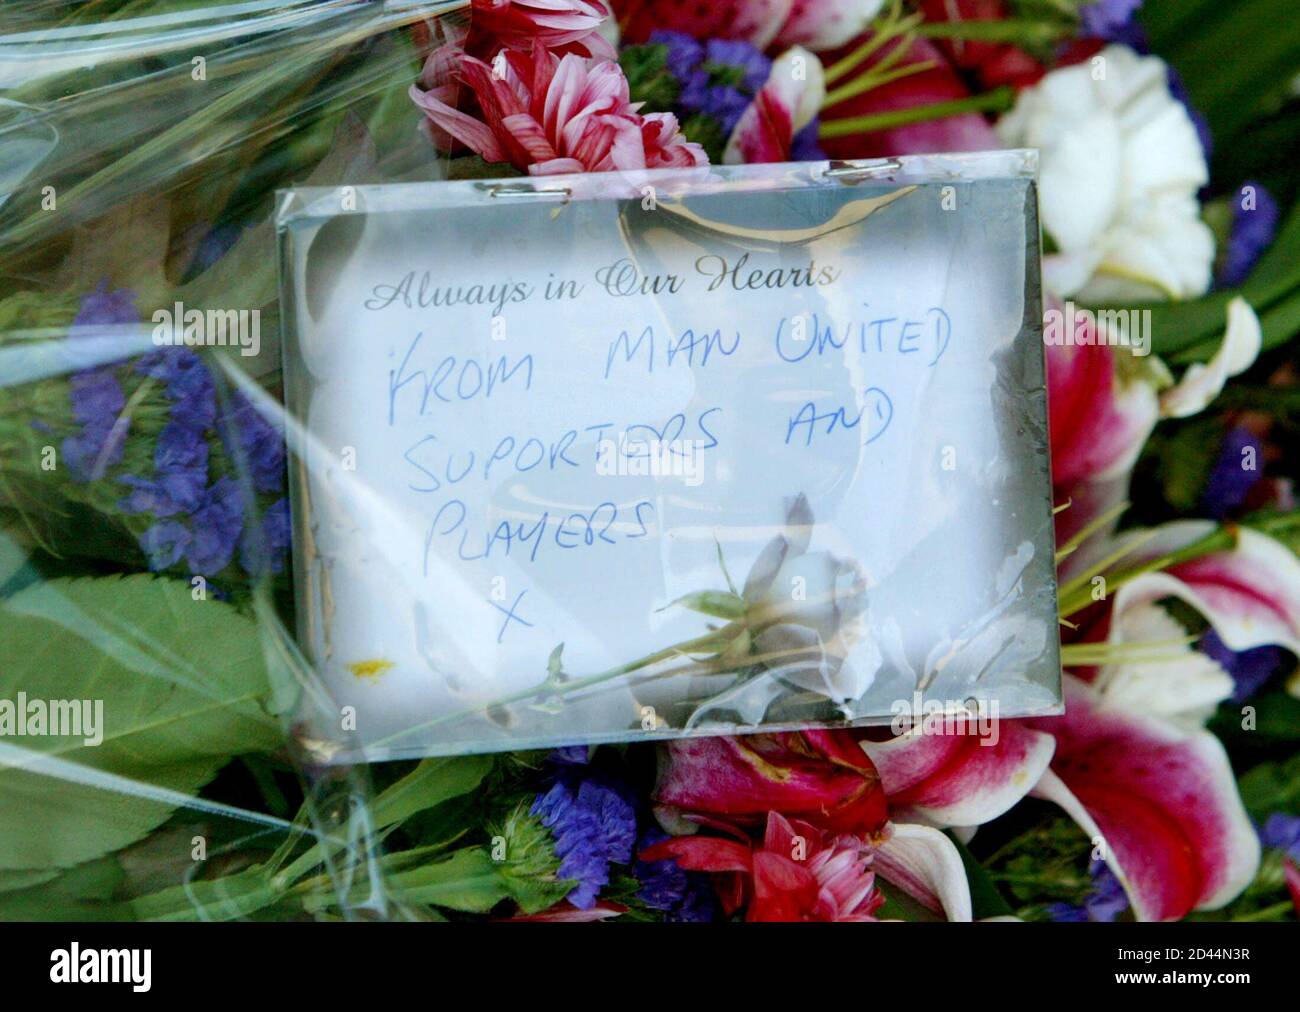 A bouquet of flowers is left outside the Old Bailey at the start of the Soham murder trial in London, November 3, 2003. Britain's Old Bailey court began the trial on Monday of former school caretaker Ian Huntley who is charged with the double murder of British schoolgirls Holly Wells and Jessica Chapman in August 2002 which shocked the nation and drew sympathy from all over the world. REUTERS/Toby Melville  TM/ASA Stock Photo